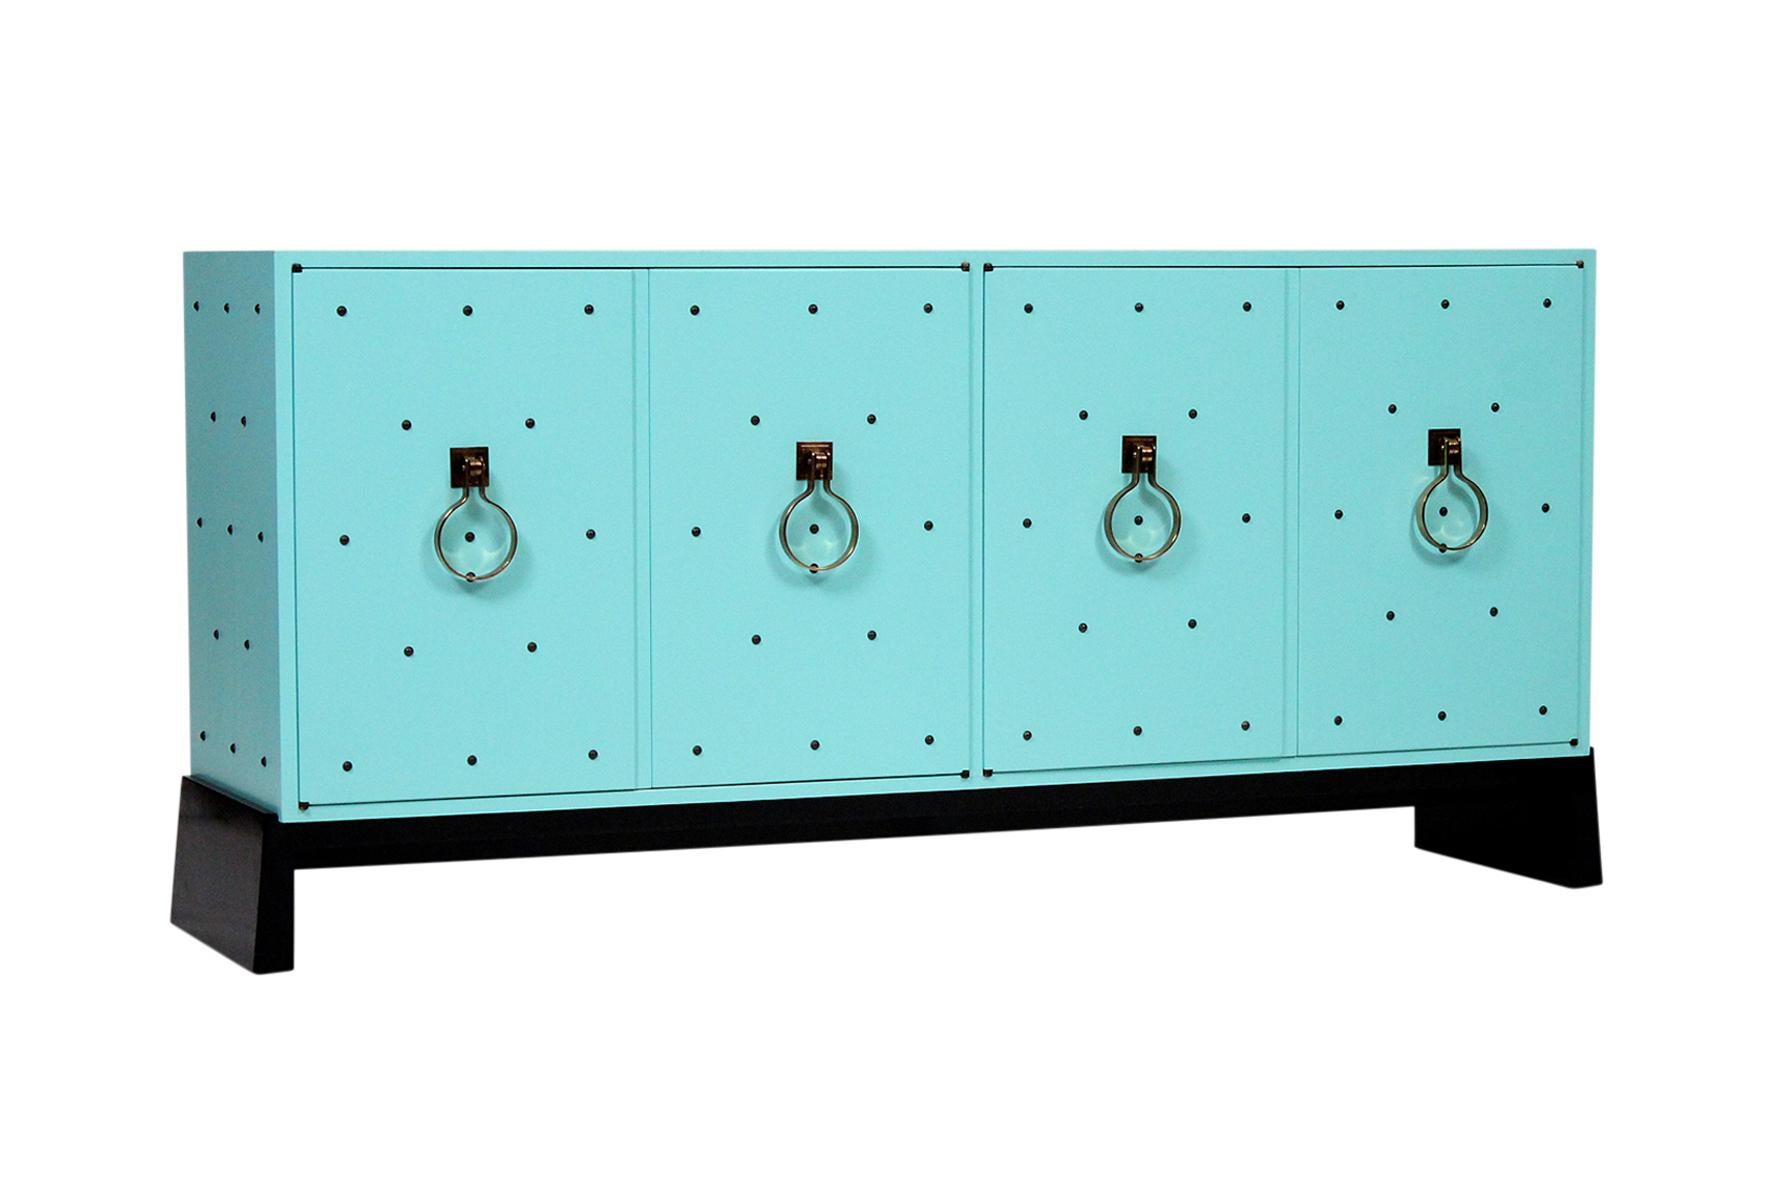 Tommi Parzinger for Parzinger Originals lacquered in Robins Egg blue exterior and a white interior. Cabinet on a lacquered black base. Four doors with brass studs and pulls. Open storage on left and drawer and shelving on right.
 Signed.